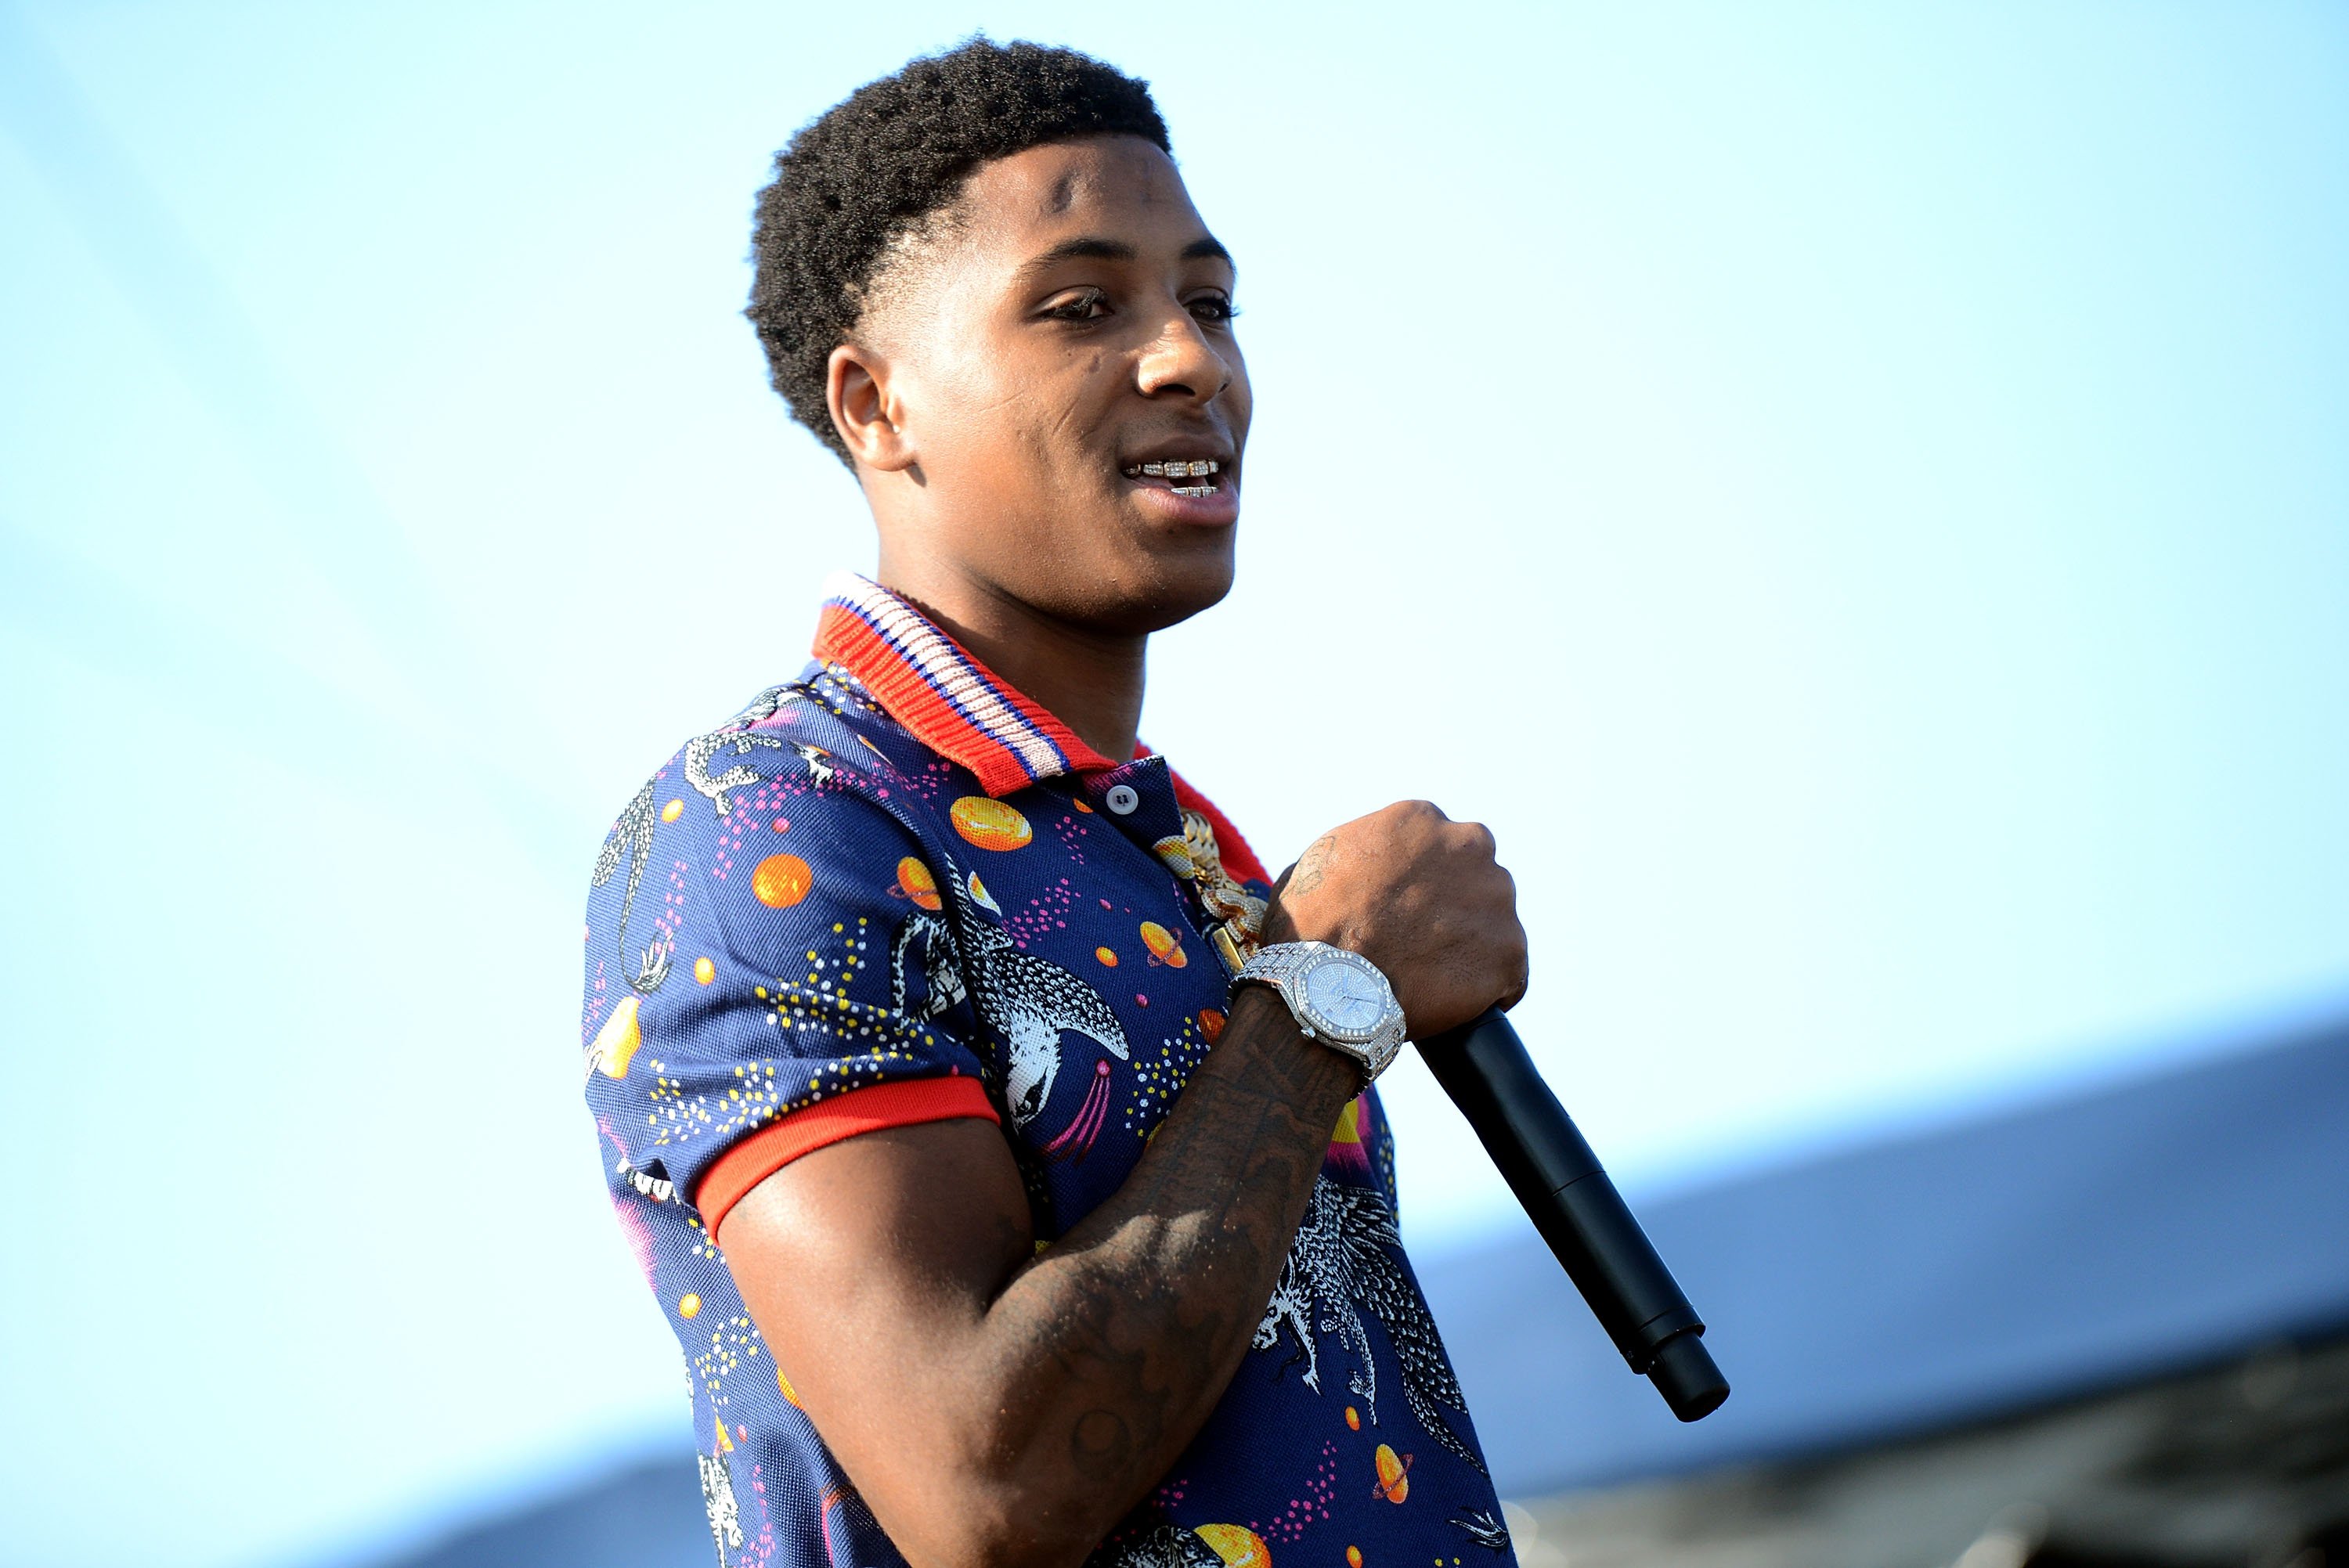 NBA Youngboy performing at the Day N Night Festival on September 10, 2017, in Anaheim, California | Source: Getty Images